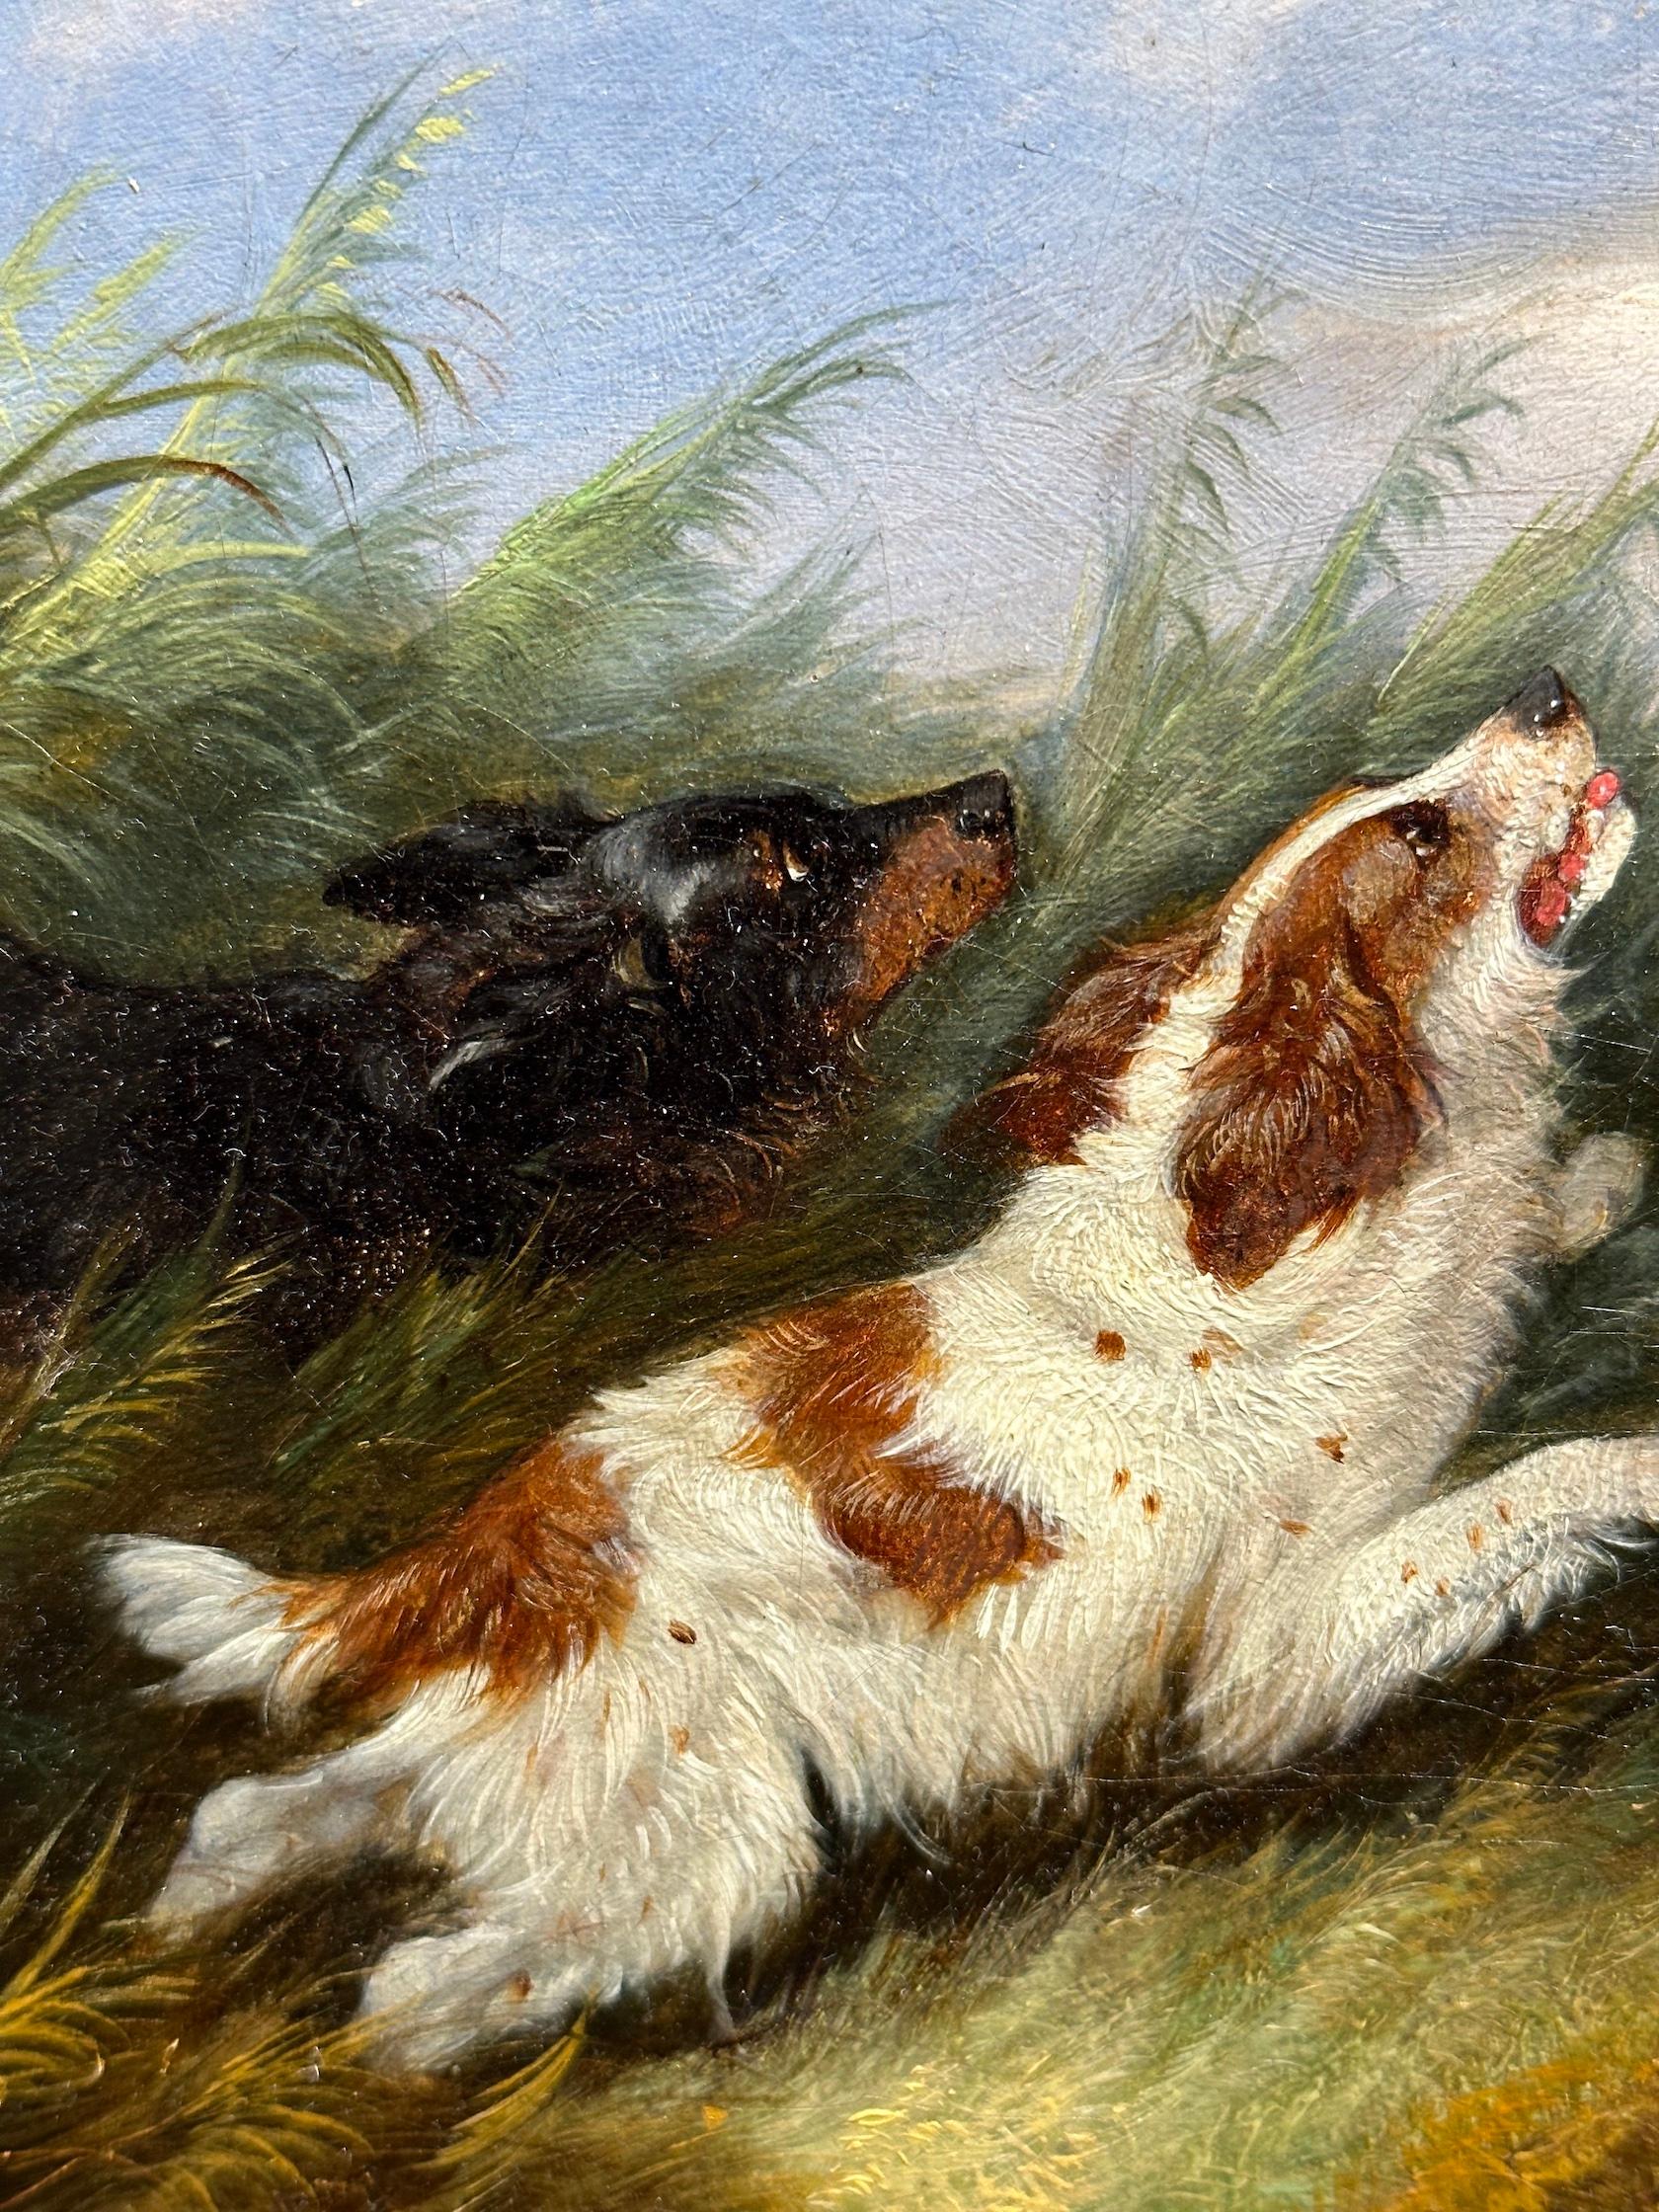 Antique Victorian English 19th C portrait of English Spaniel dogs in a landscape chasing ducks.
 
George Armfield was a mid-Victorian painter of mostly dog scenes but also painted other animal subjects such as interiors with huntsmen and simple